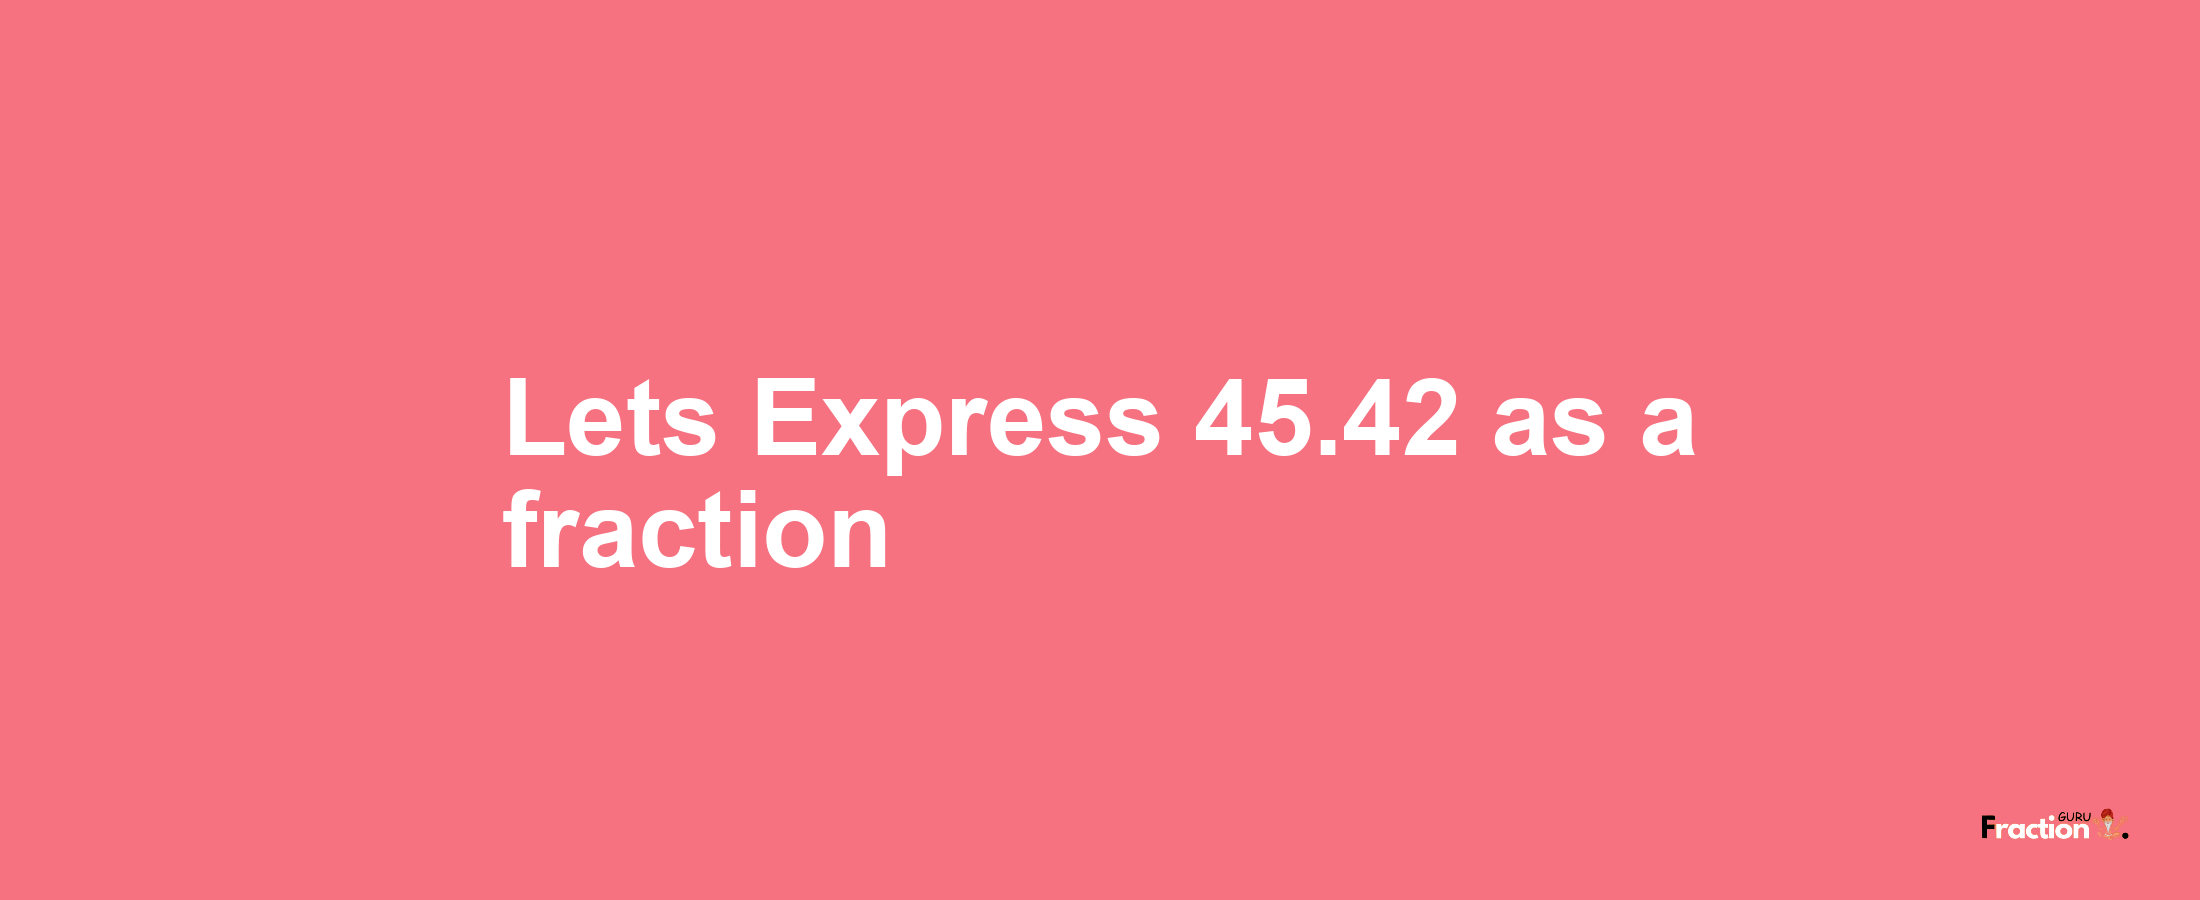 Lets Express 45.42 as afraction